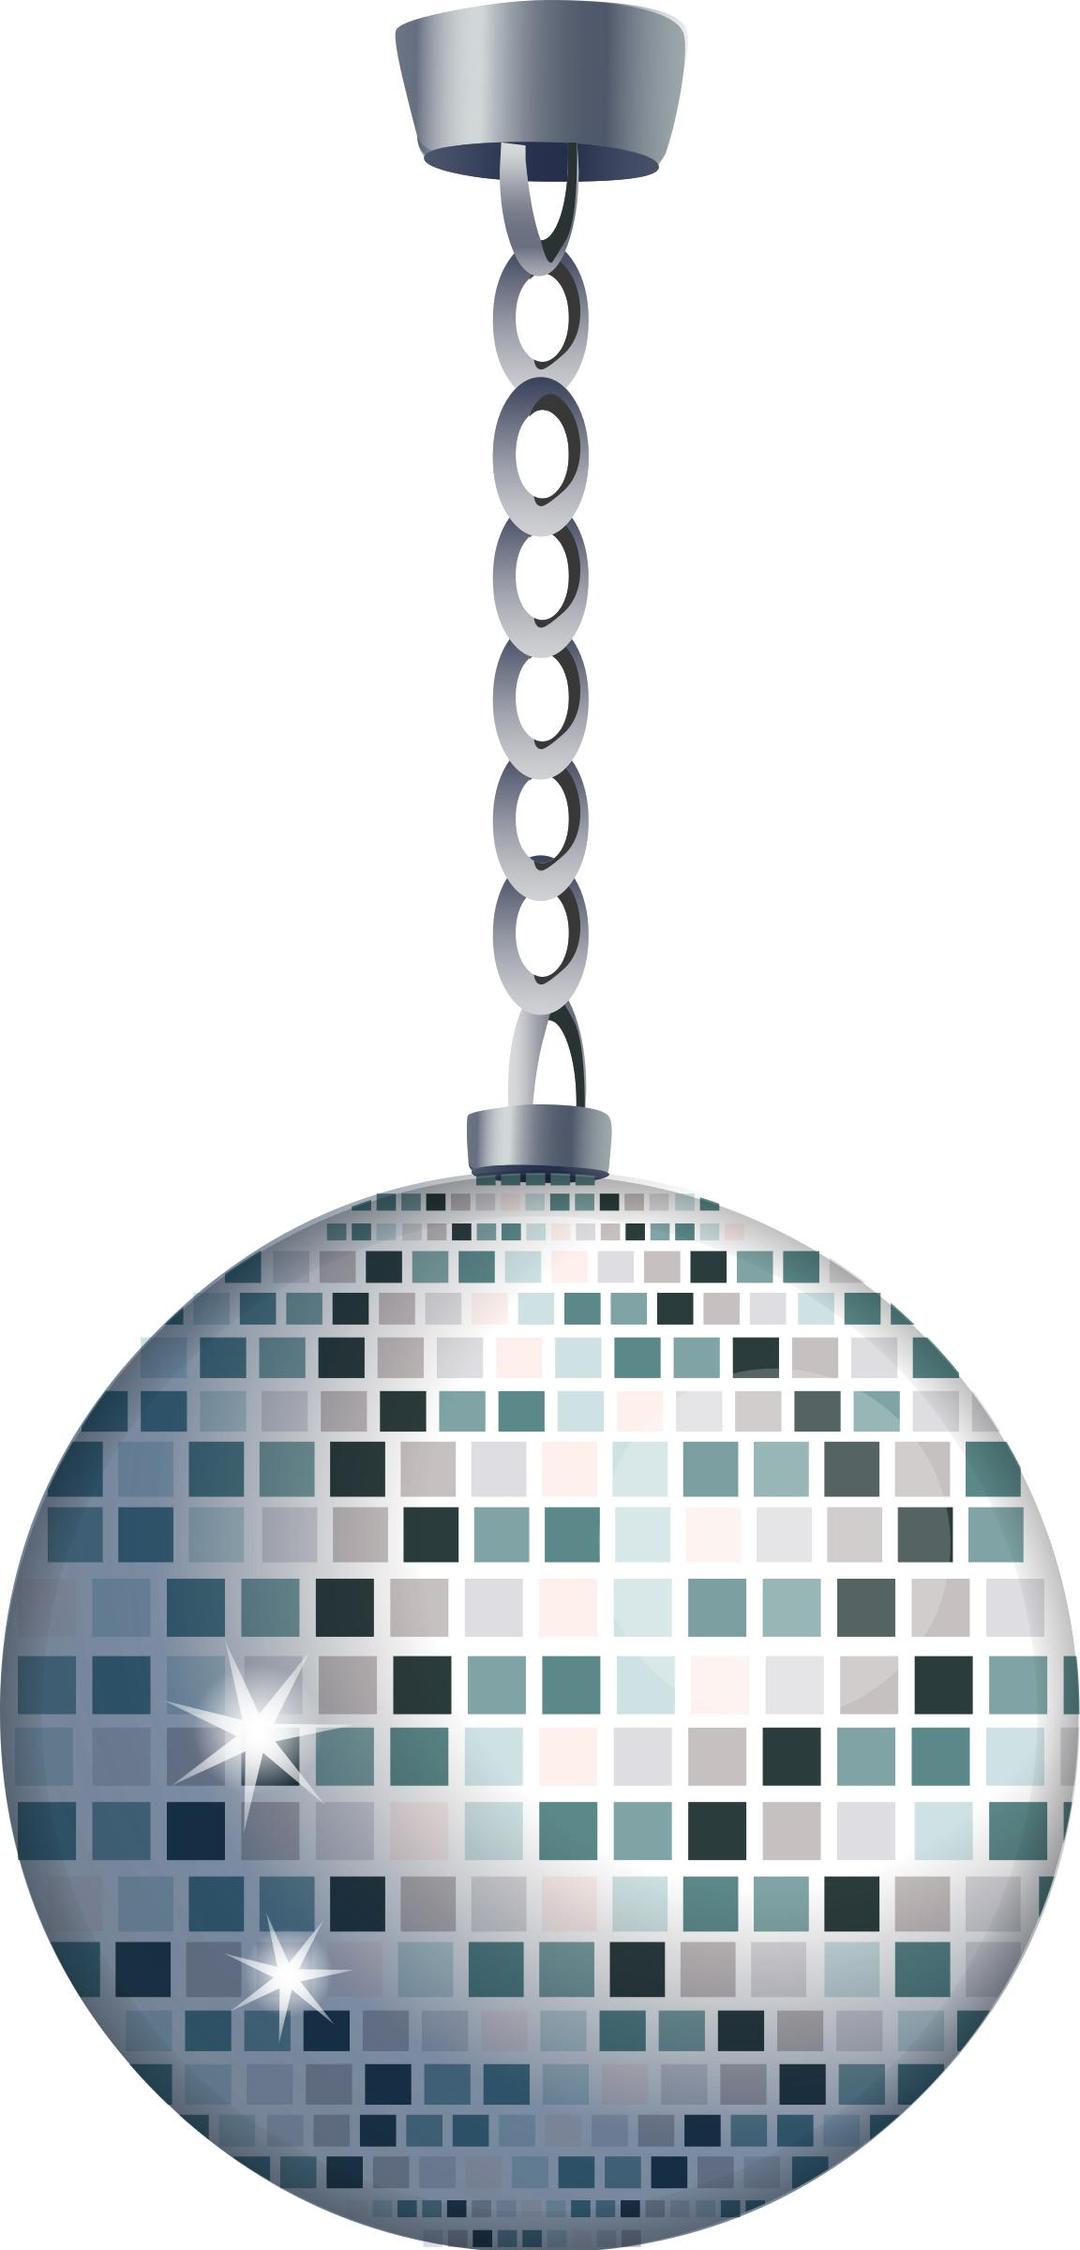 Glitter ball from Glitch png transparent